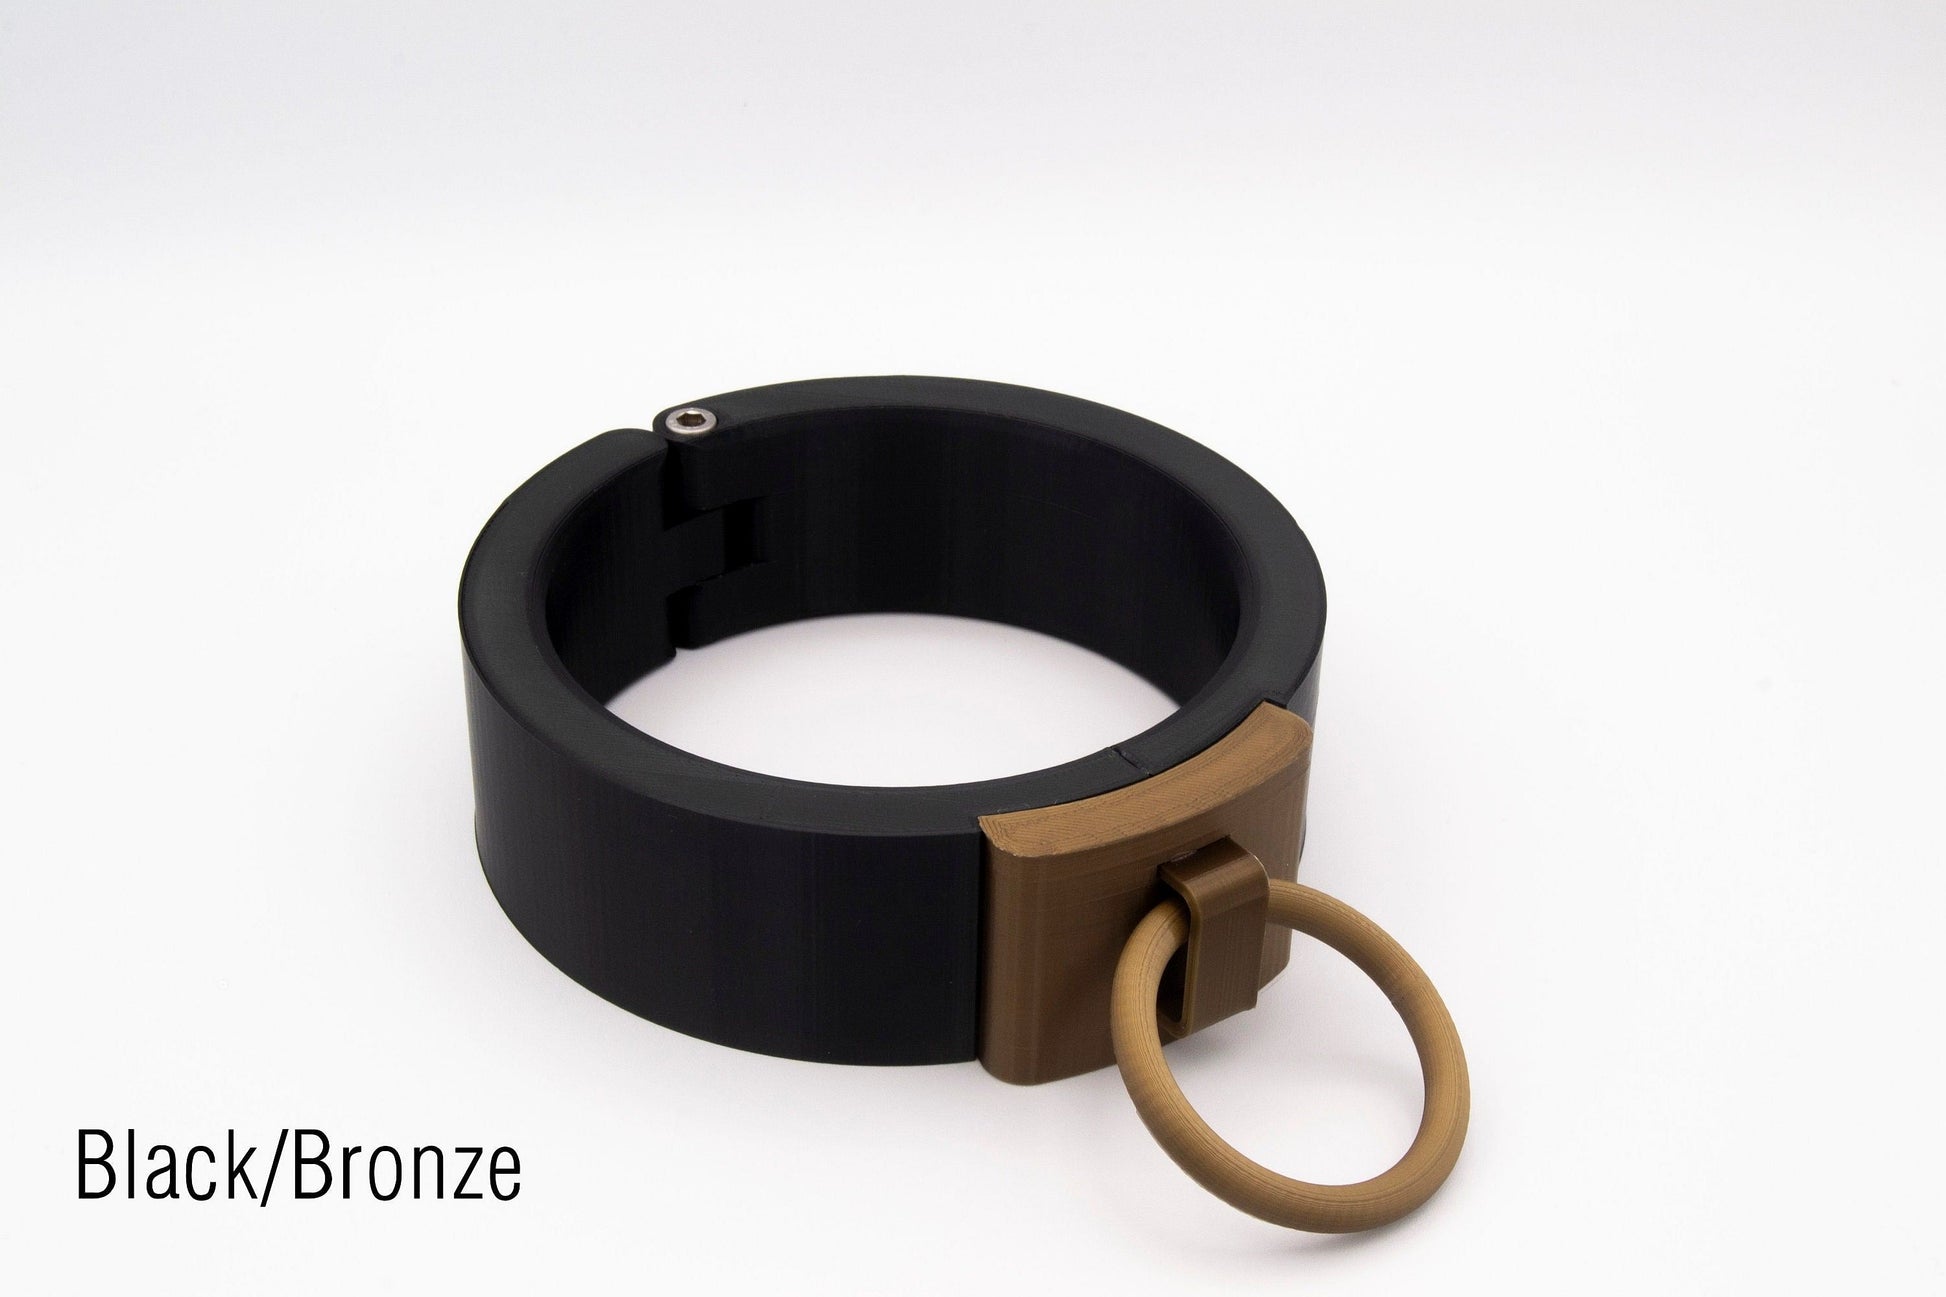 sleek nordic collar featuring a bronze fastener with a ring